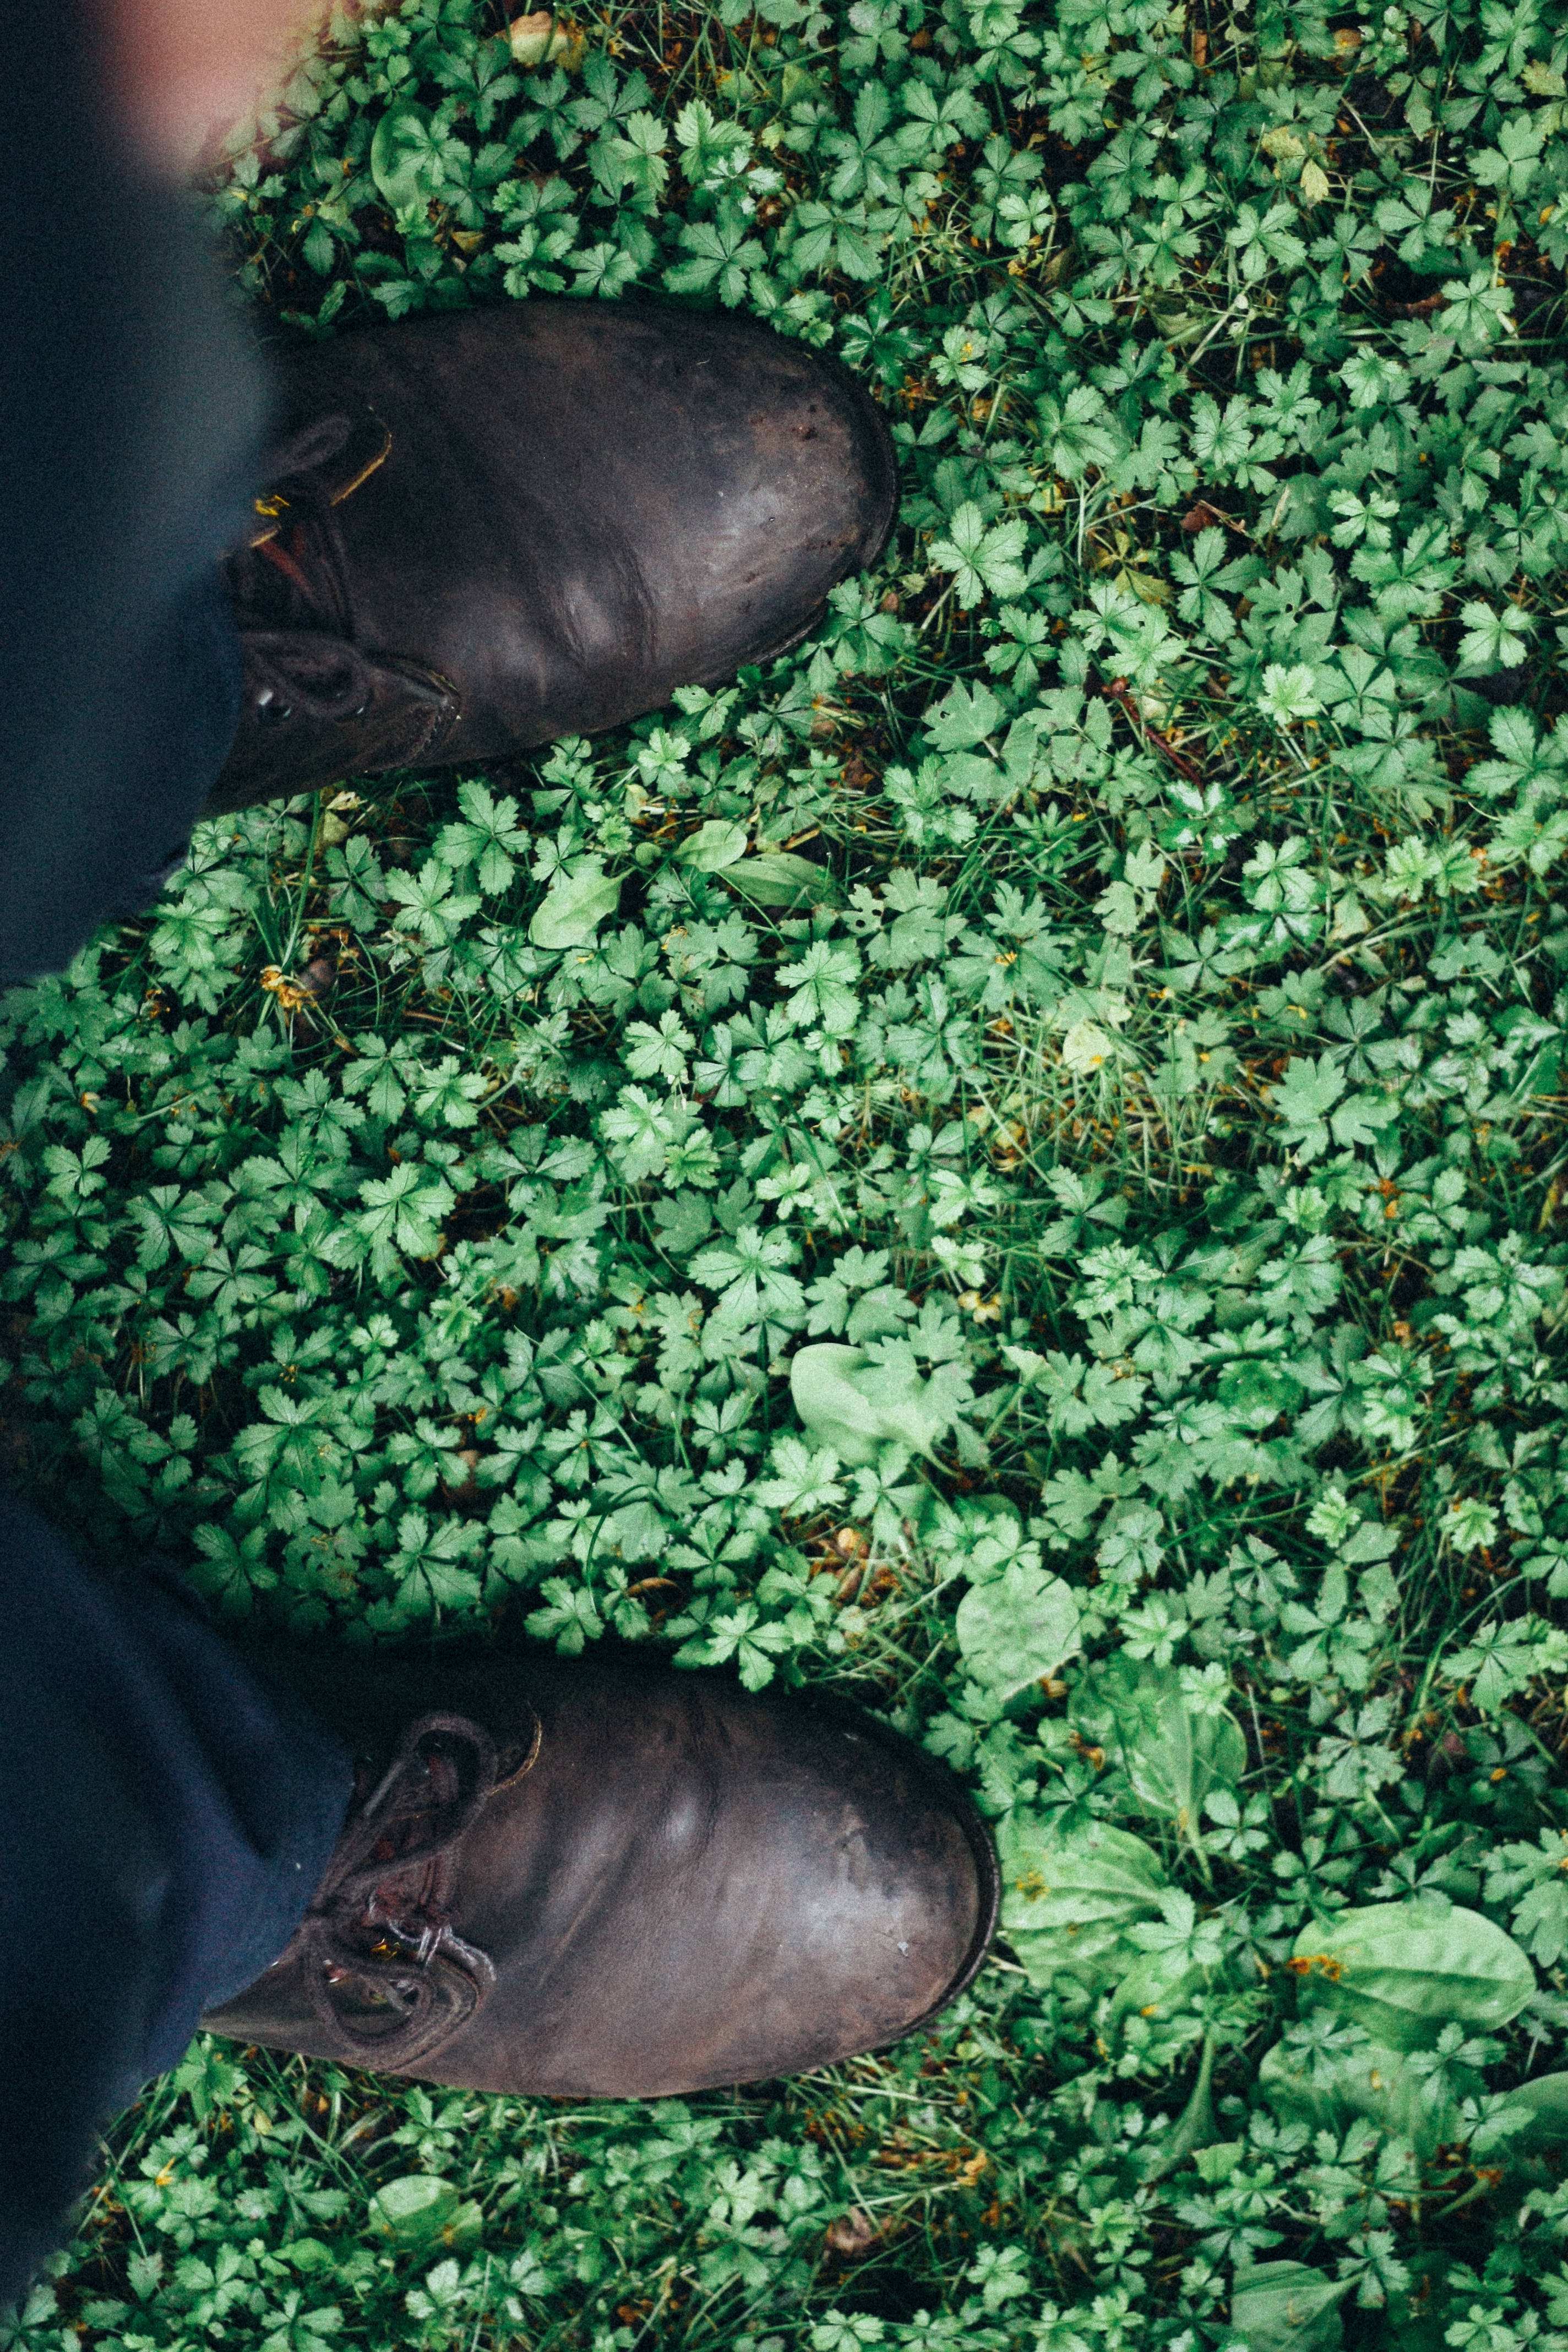 human pair of black dress shoes standing in green leaf grass